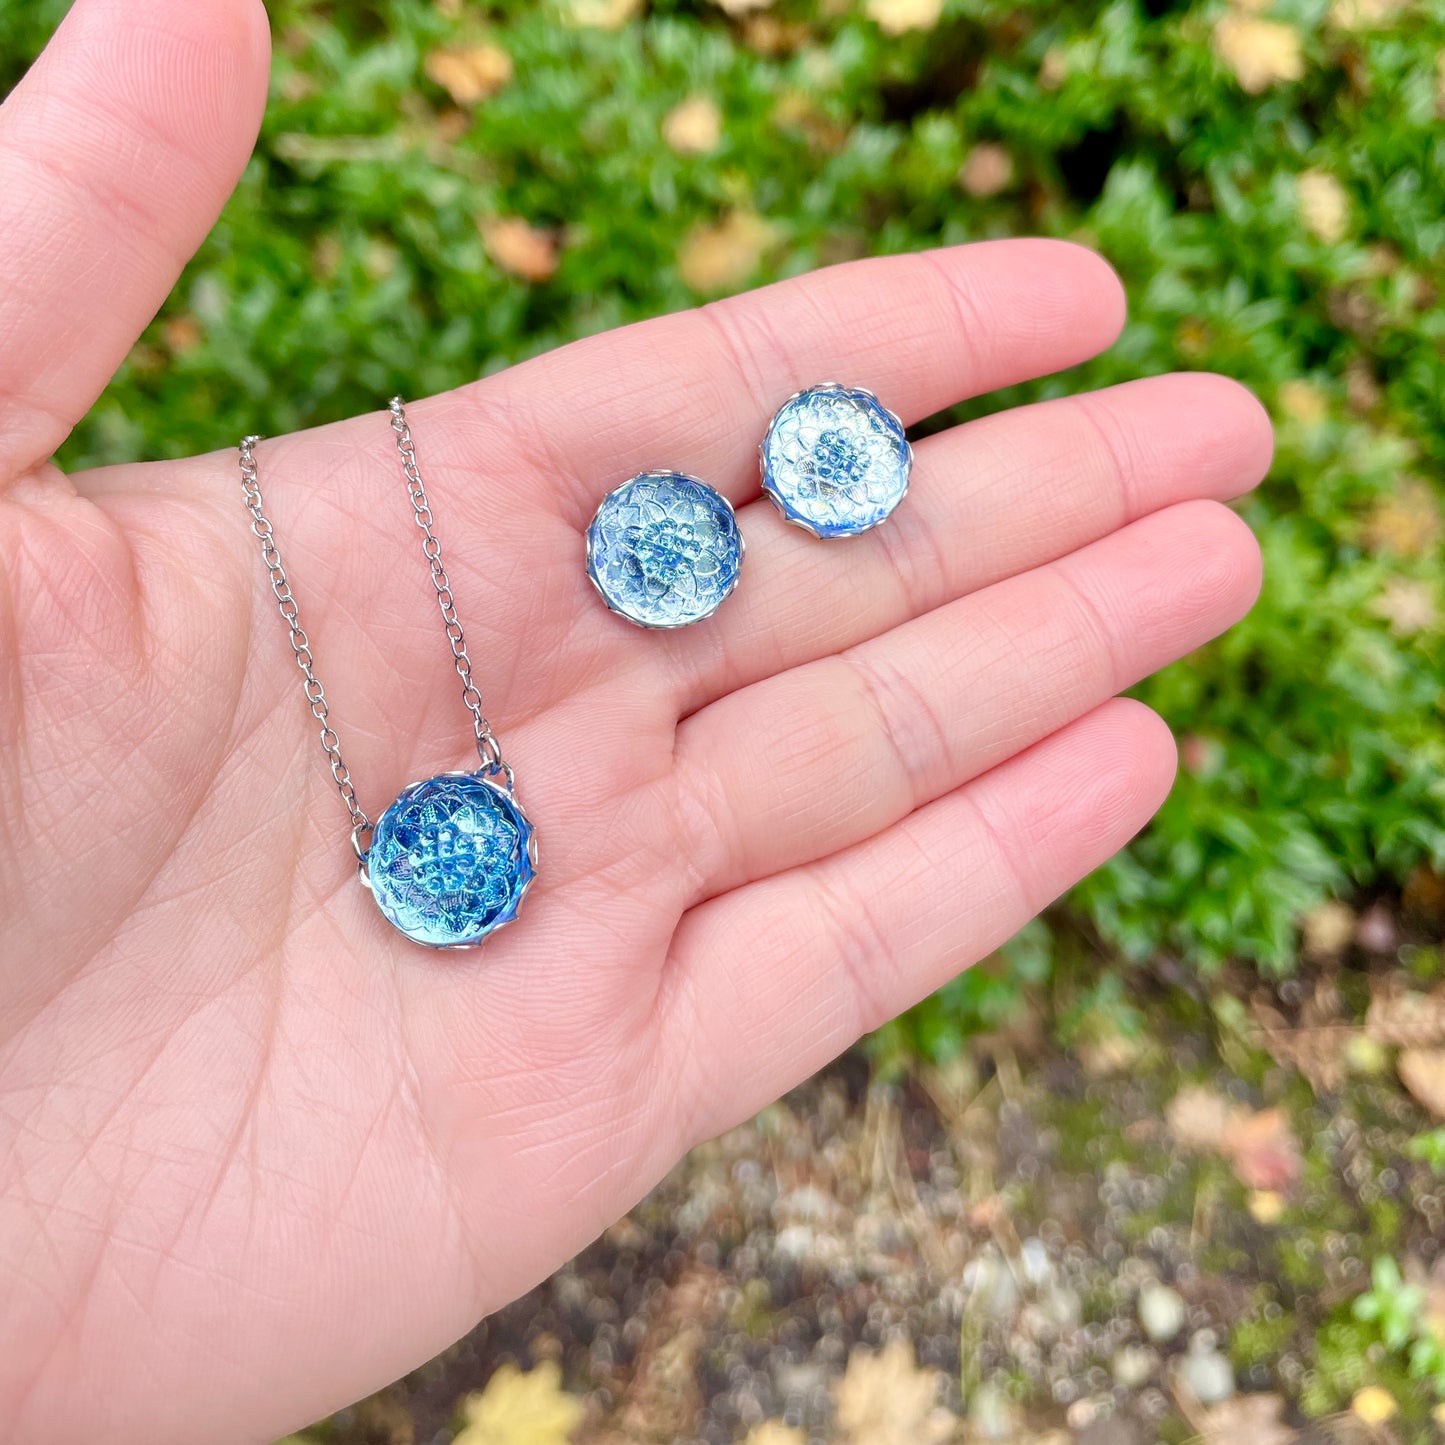 Blue Depths Czech Glass Button Necklace and Earrings Gift Set